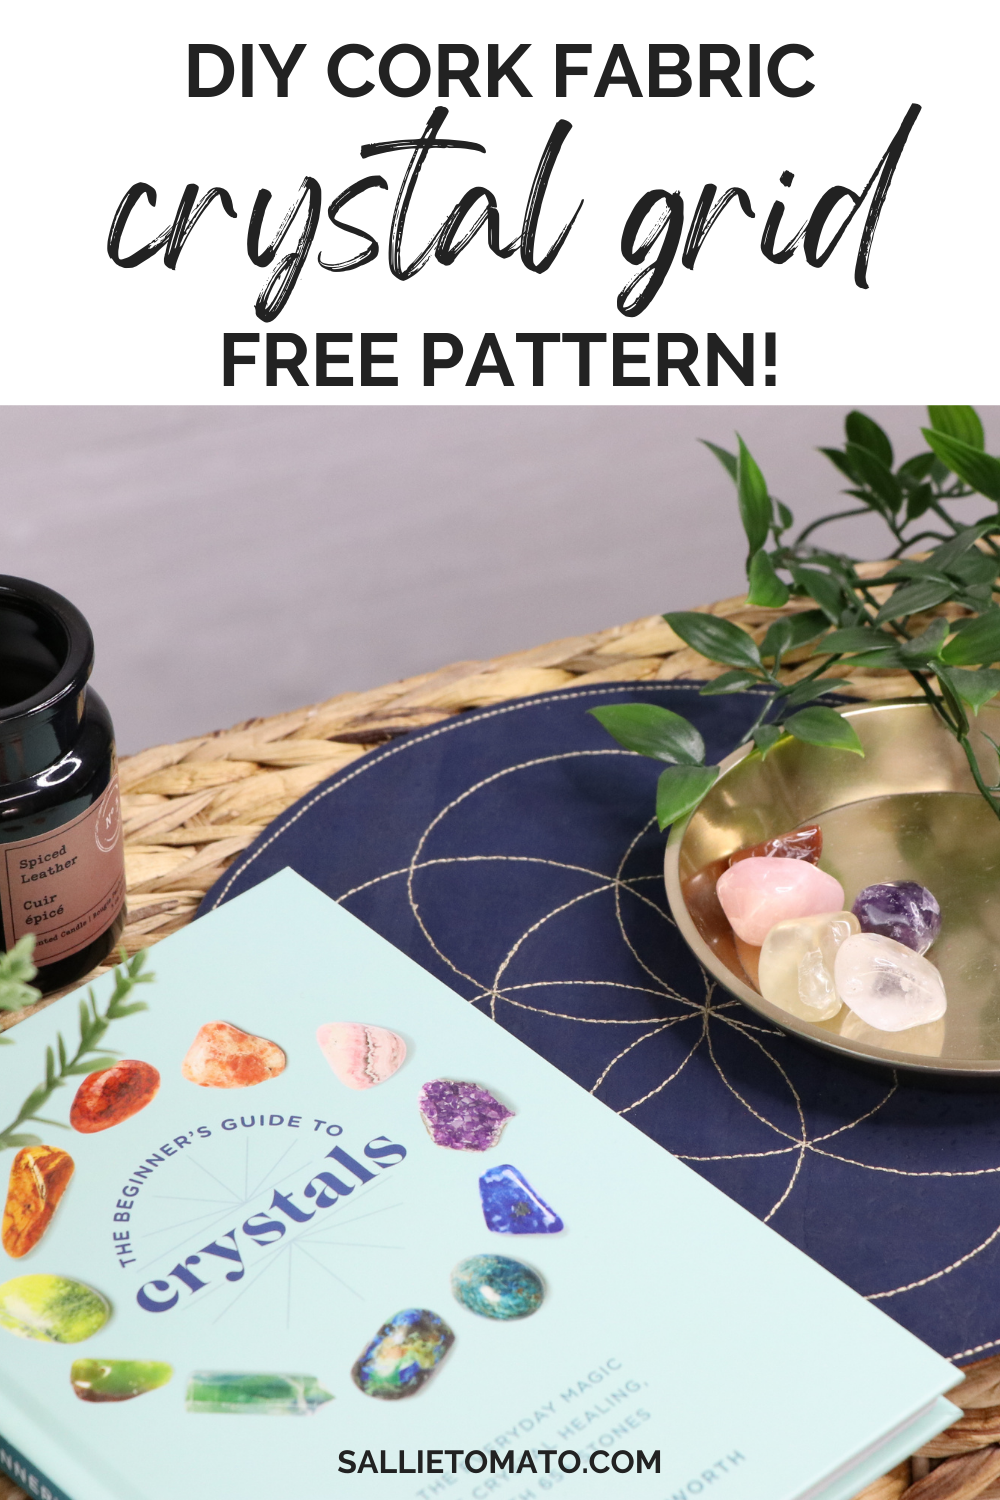 DIY Crystal Grids from Cork Fabric or Faux Leather | FREE PATTERN!